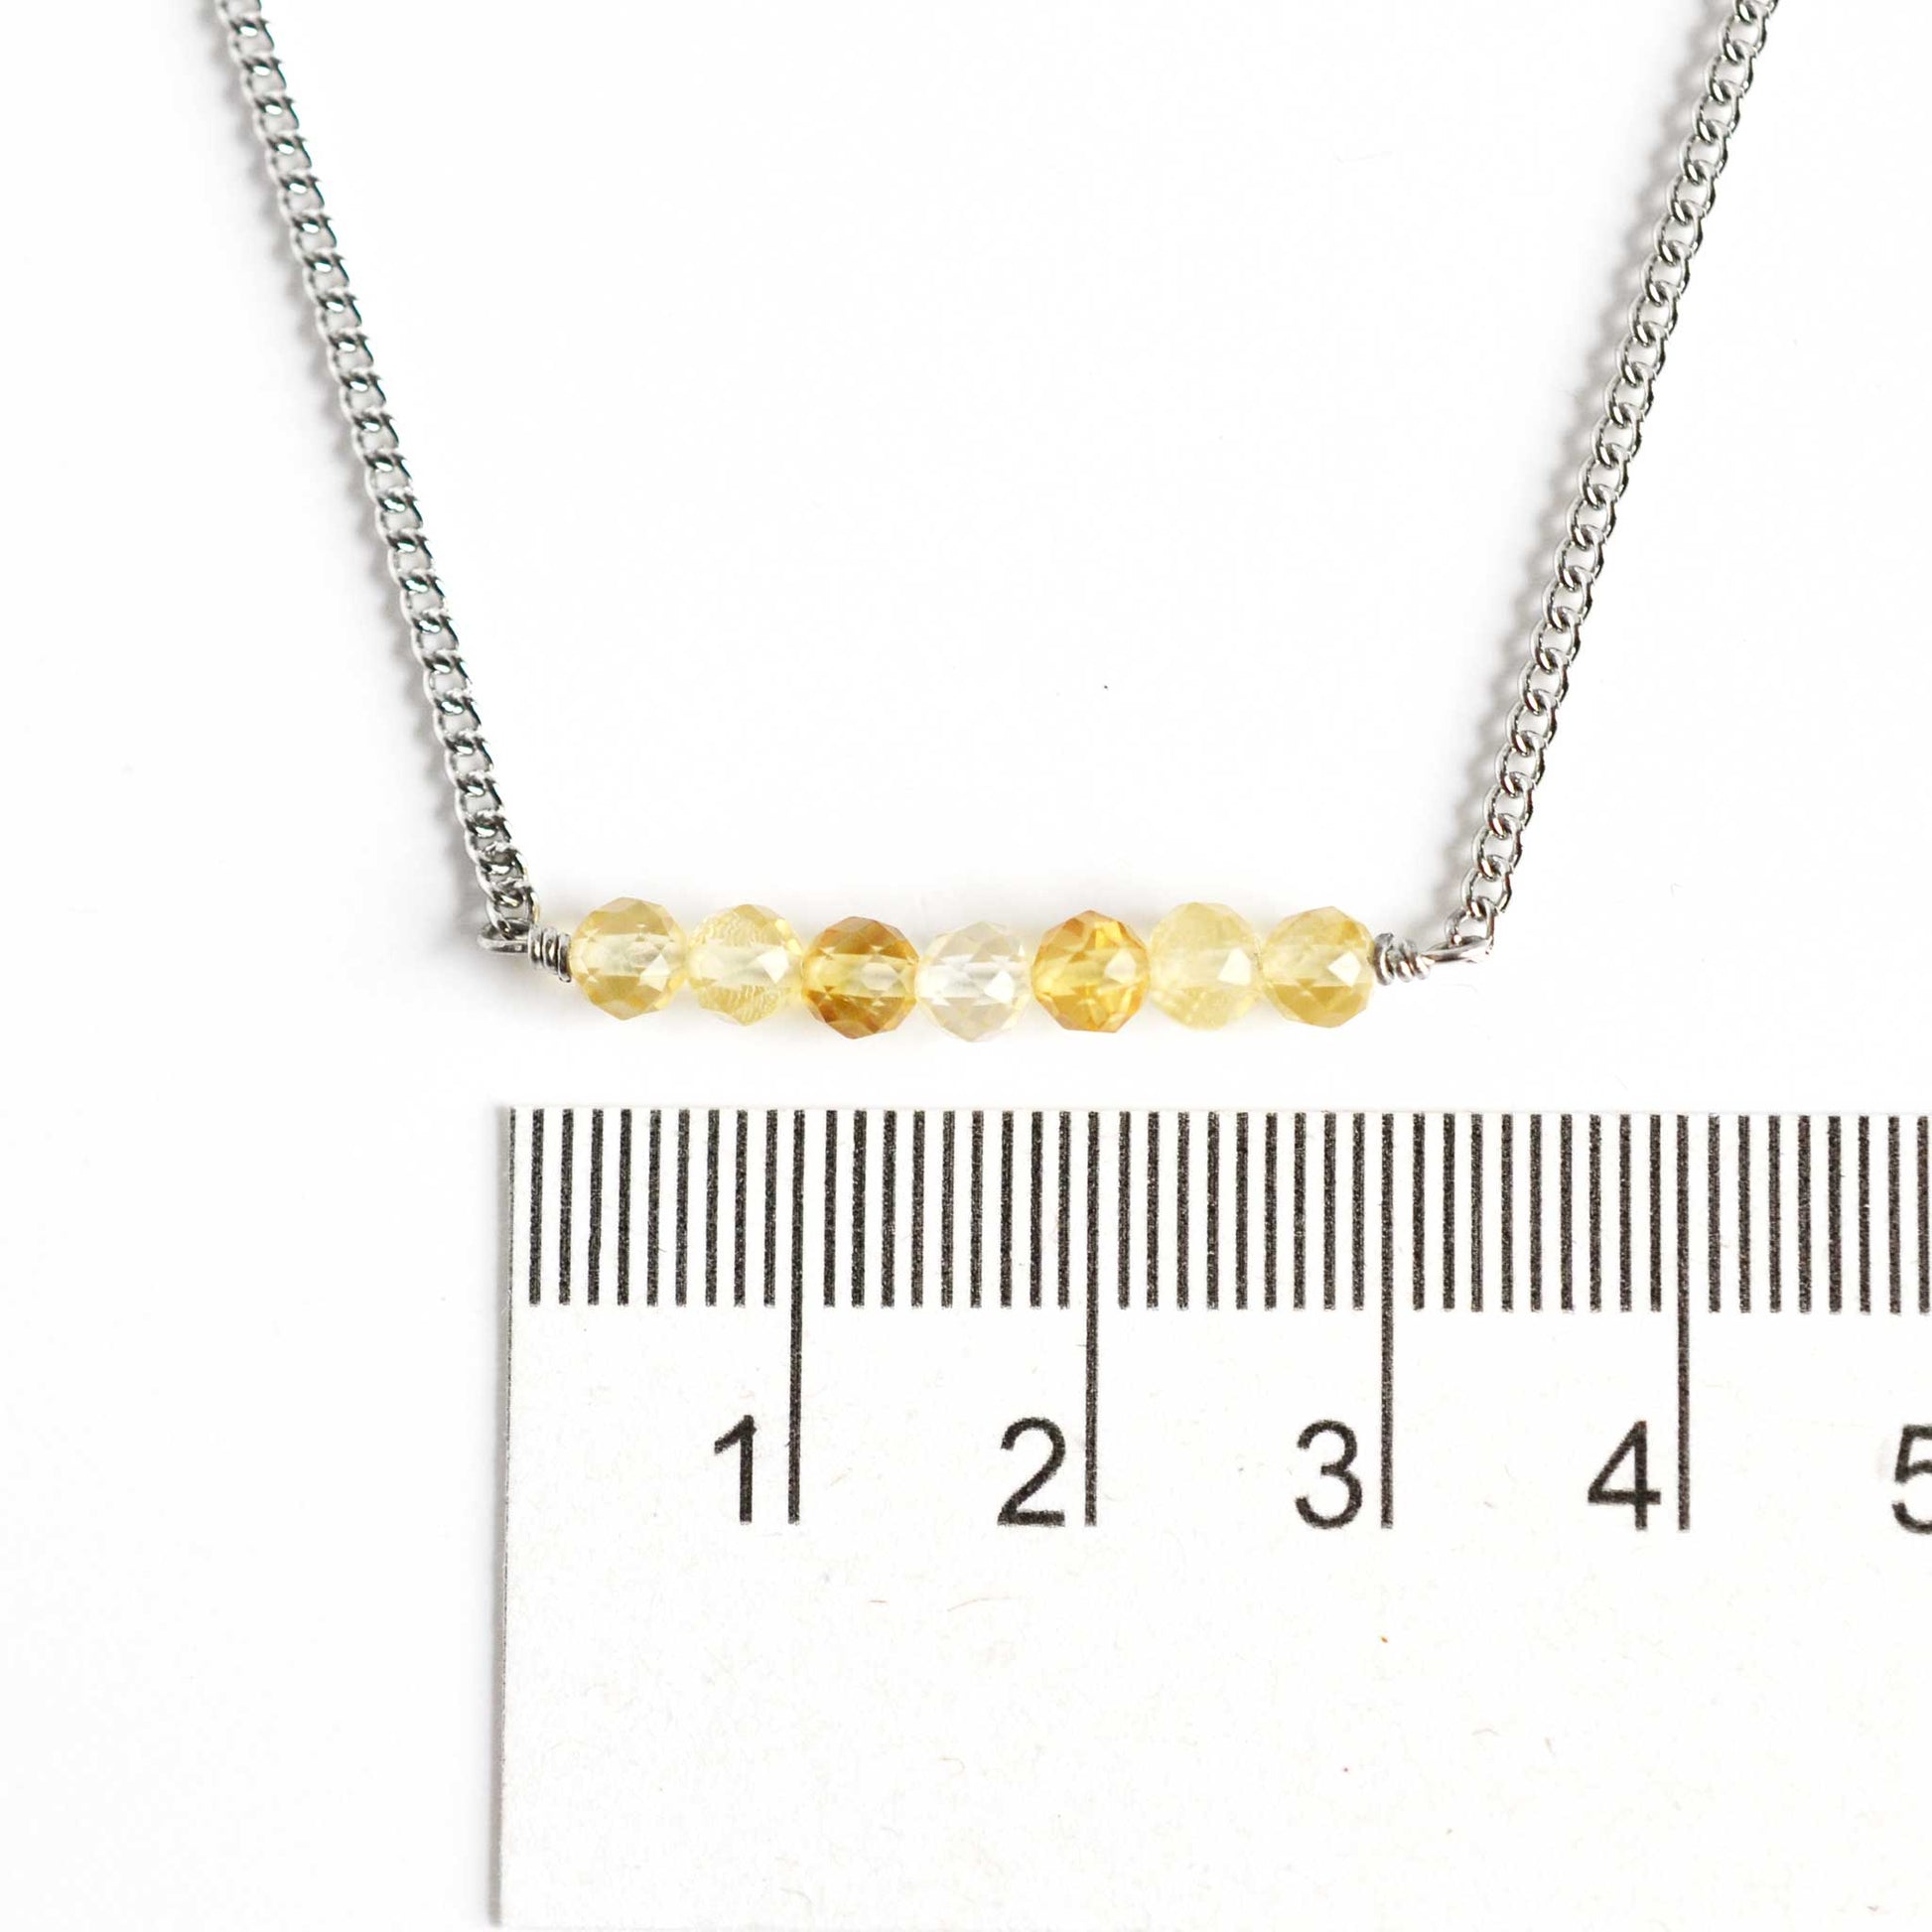 Dainty Citrine crystal necklace with 4mm Citrine gemstone beads next to ruler